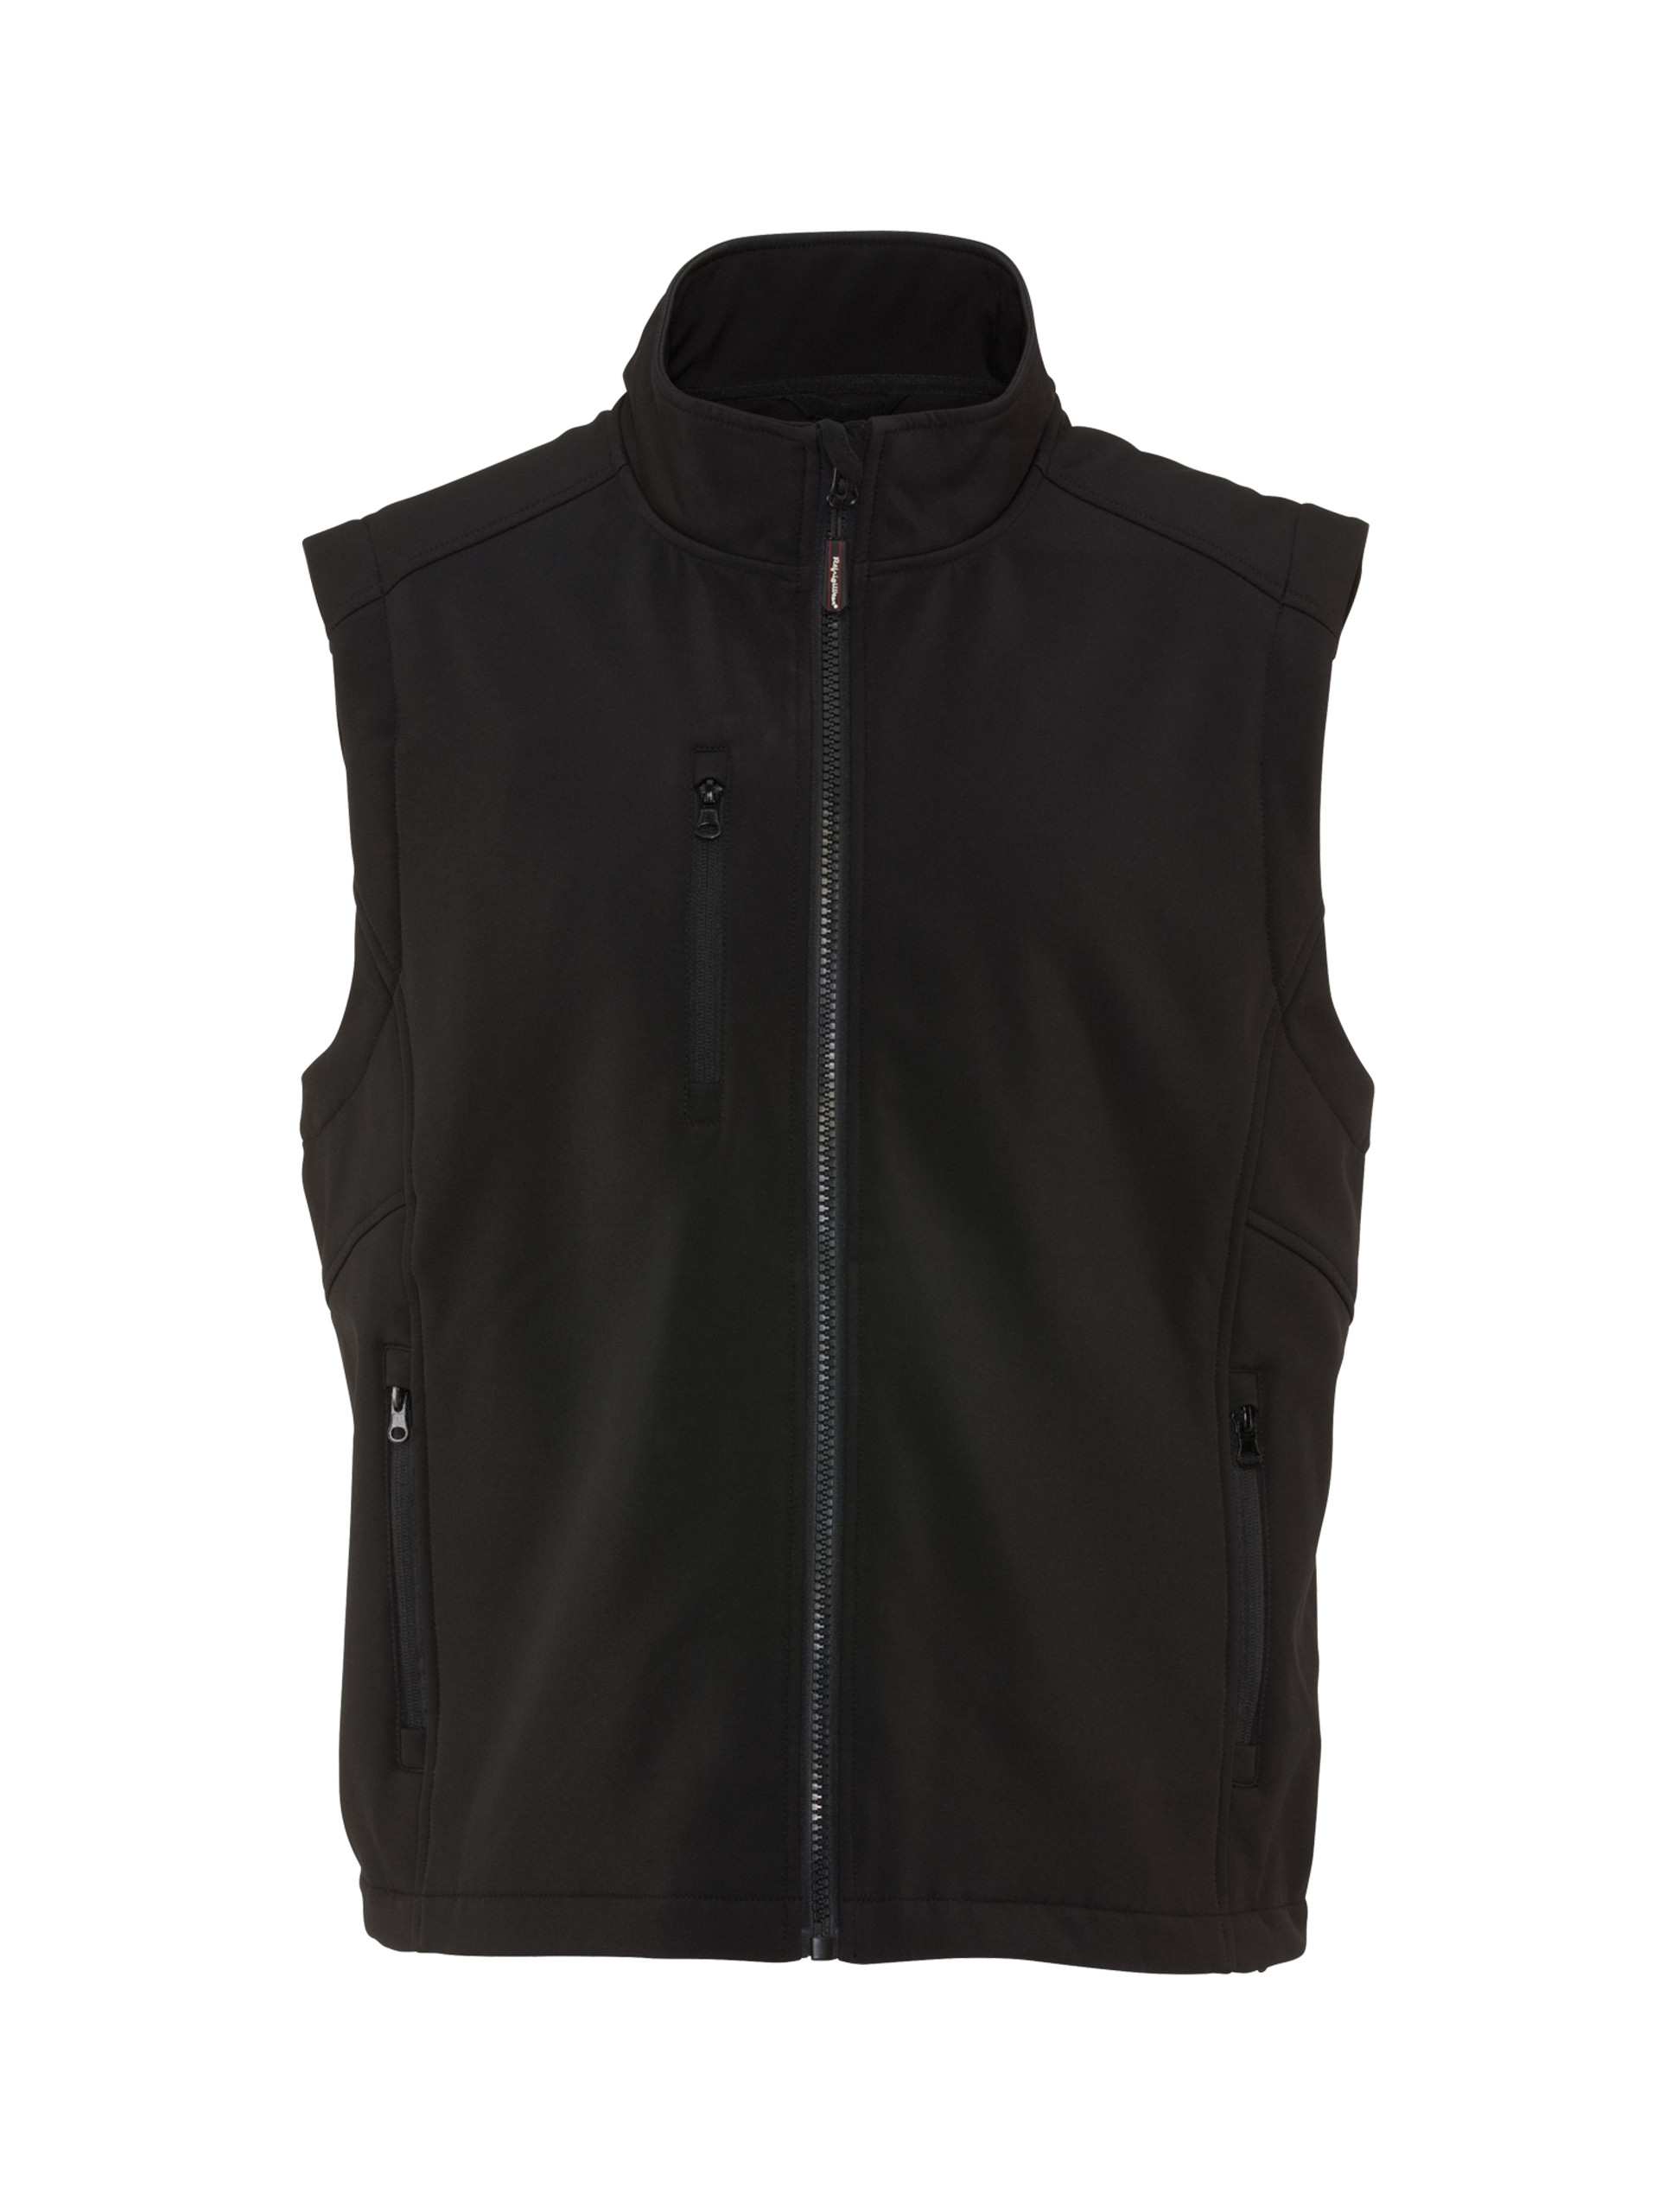 WHY AND WHEN TO WEAR A VEST FOR WARMTH  RefrigiWear